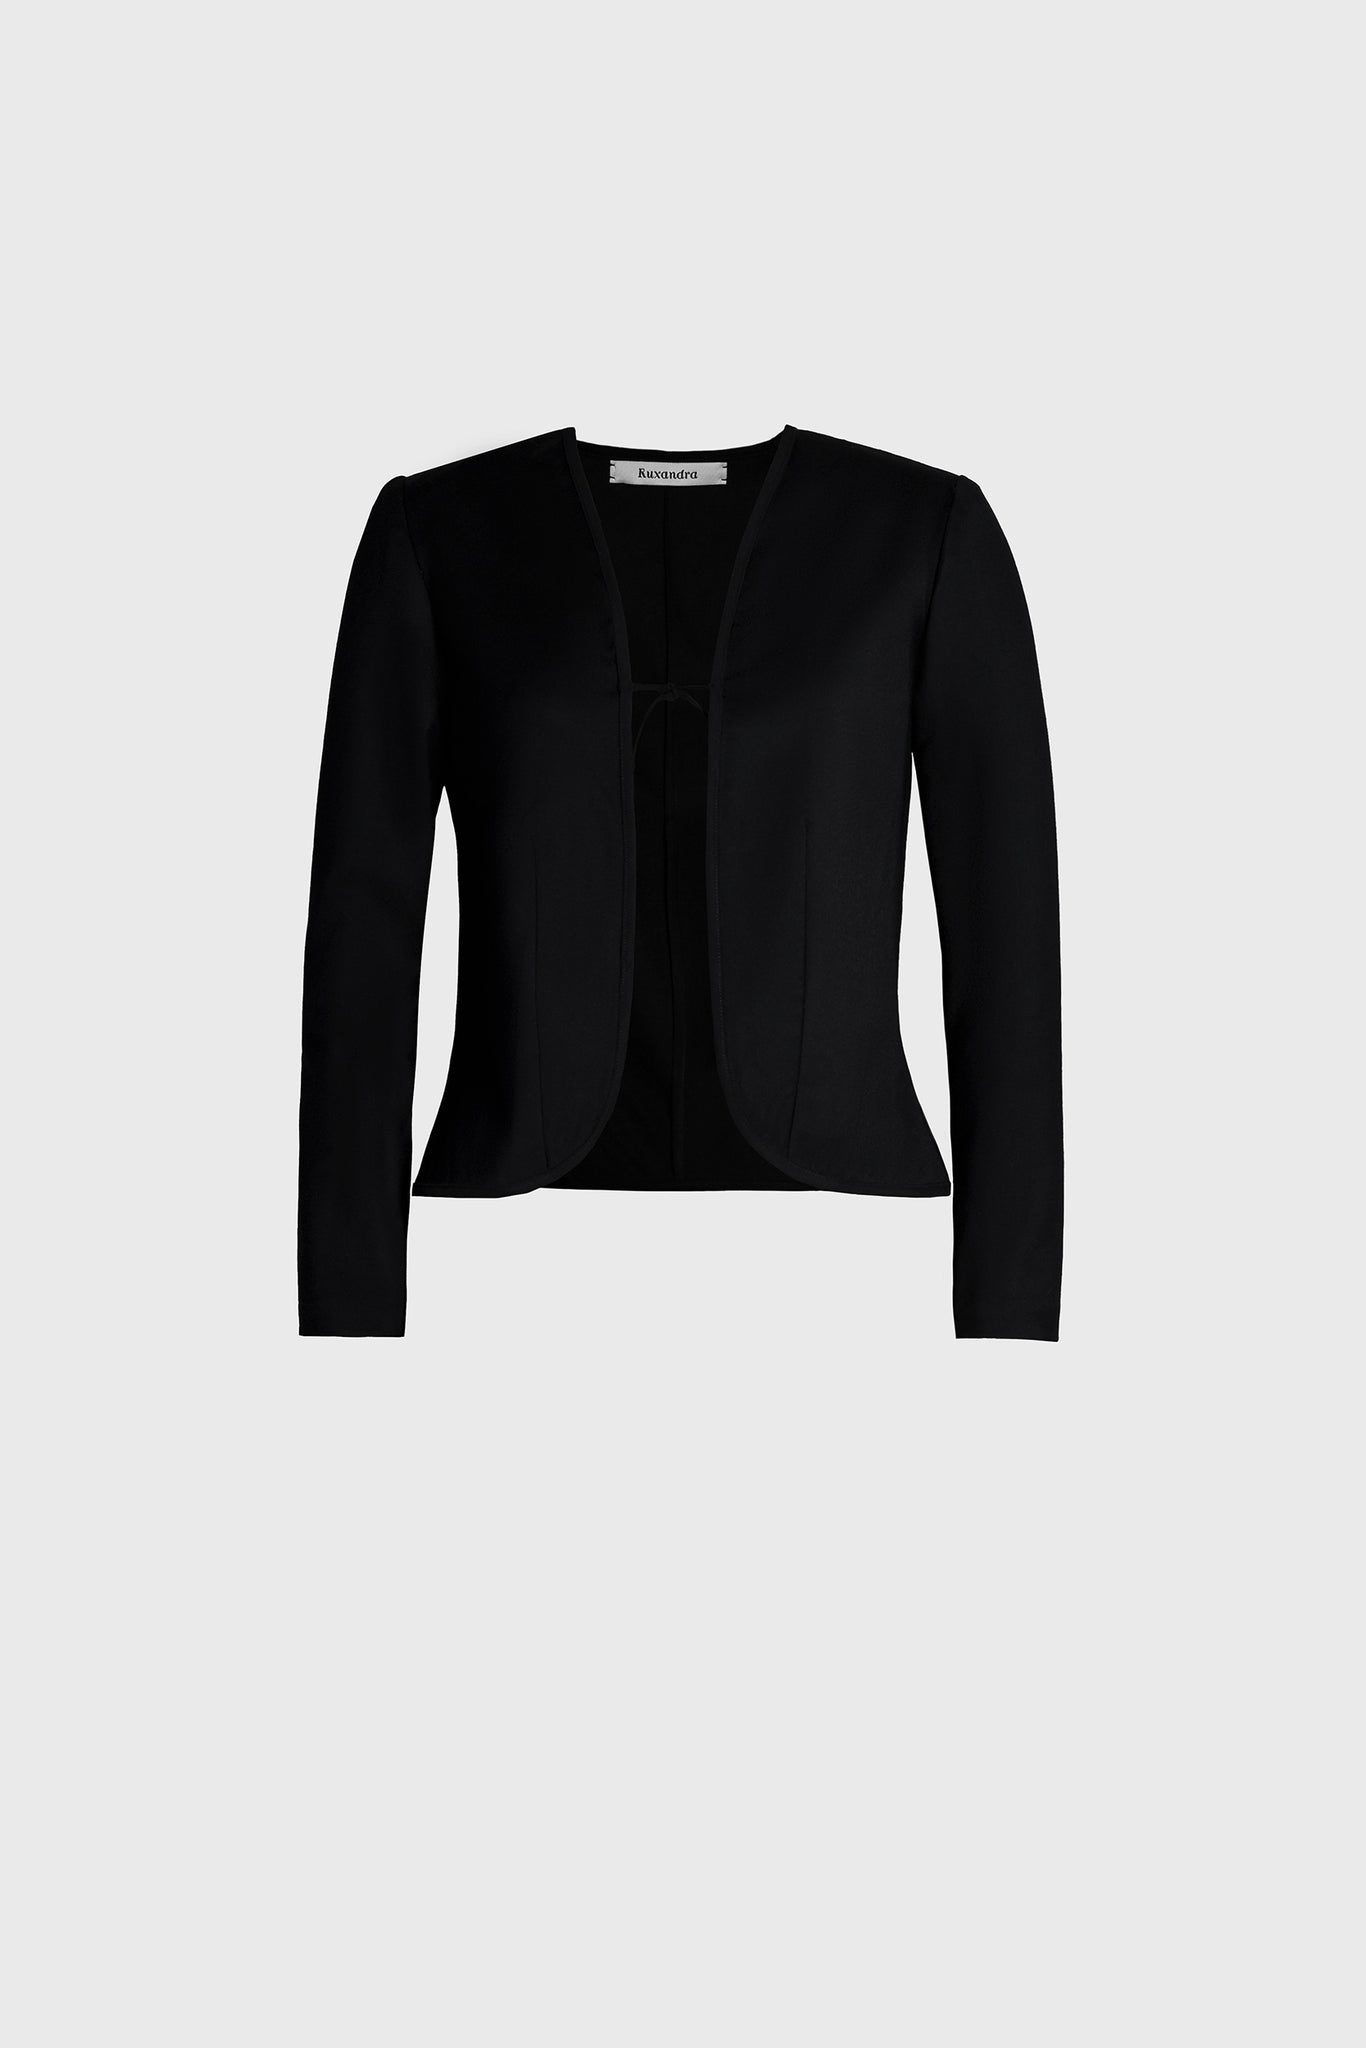 Ruxandra women's cropped bolero from lightweight black wool, long sleeves, front cord closure, round hemline, impressive cut, style with casual or business looks, timeless shape